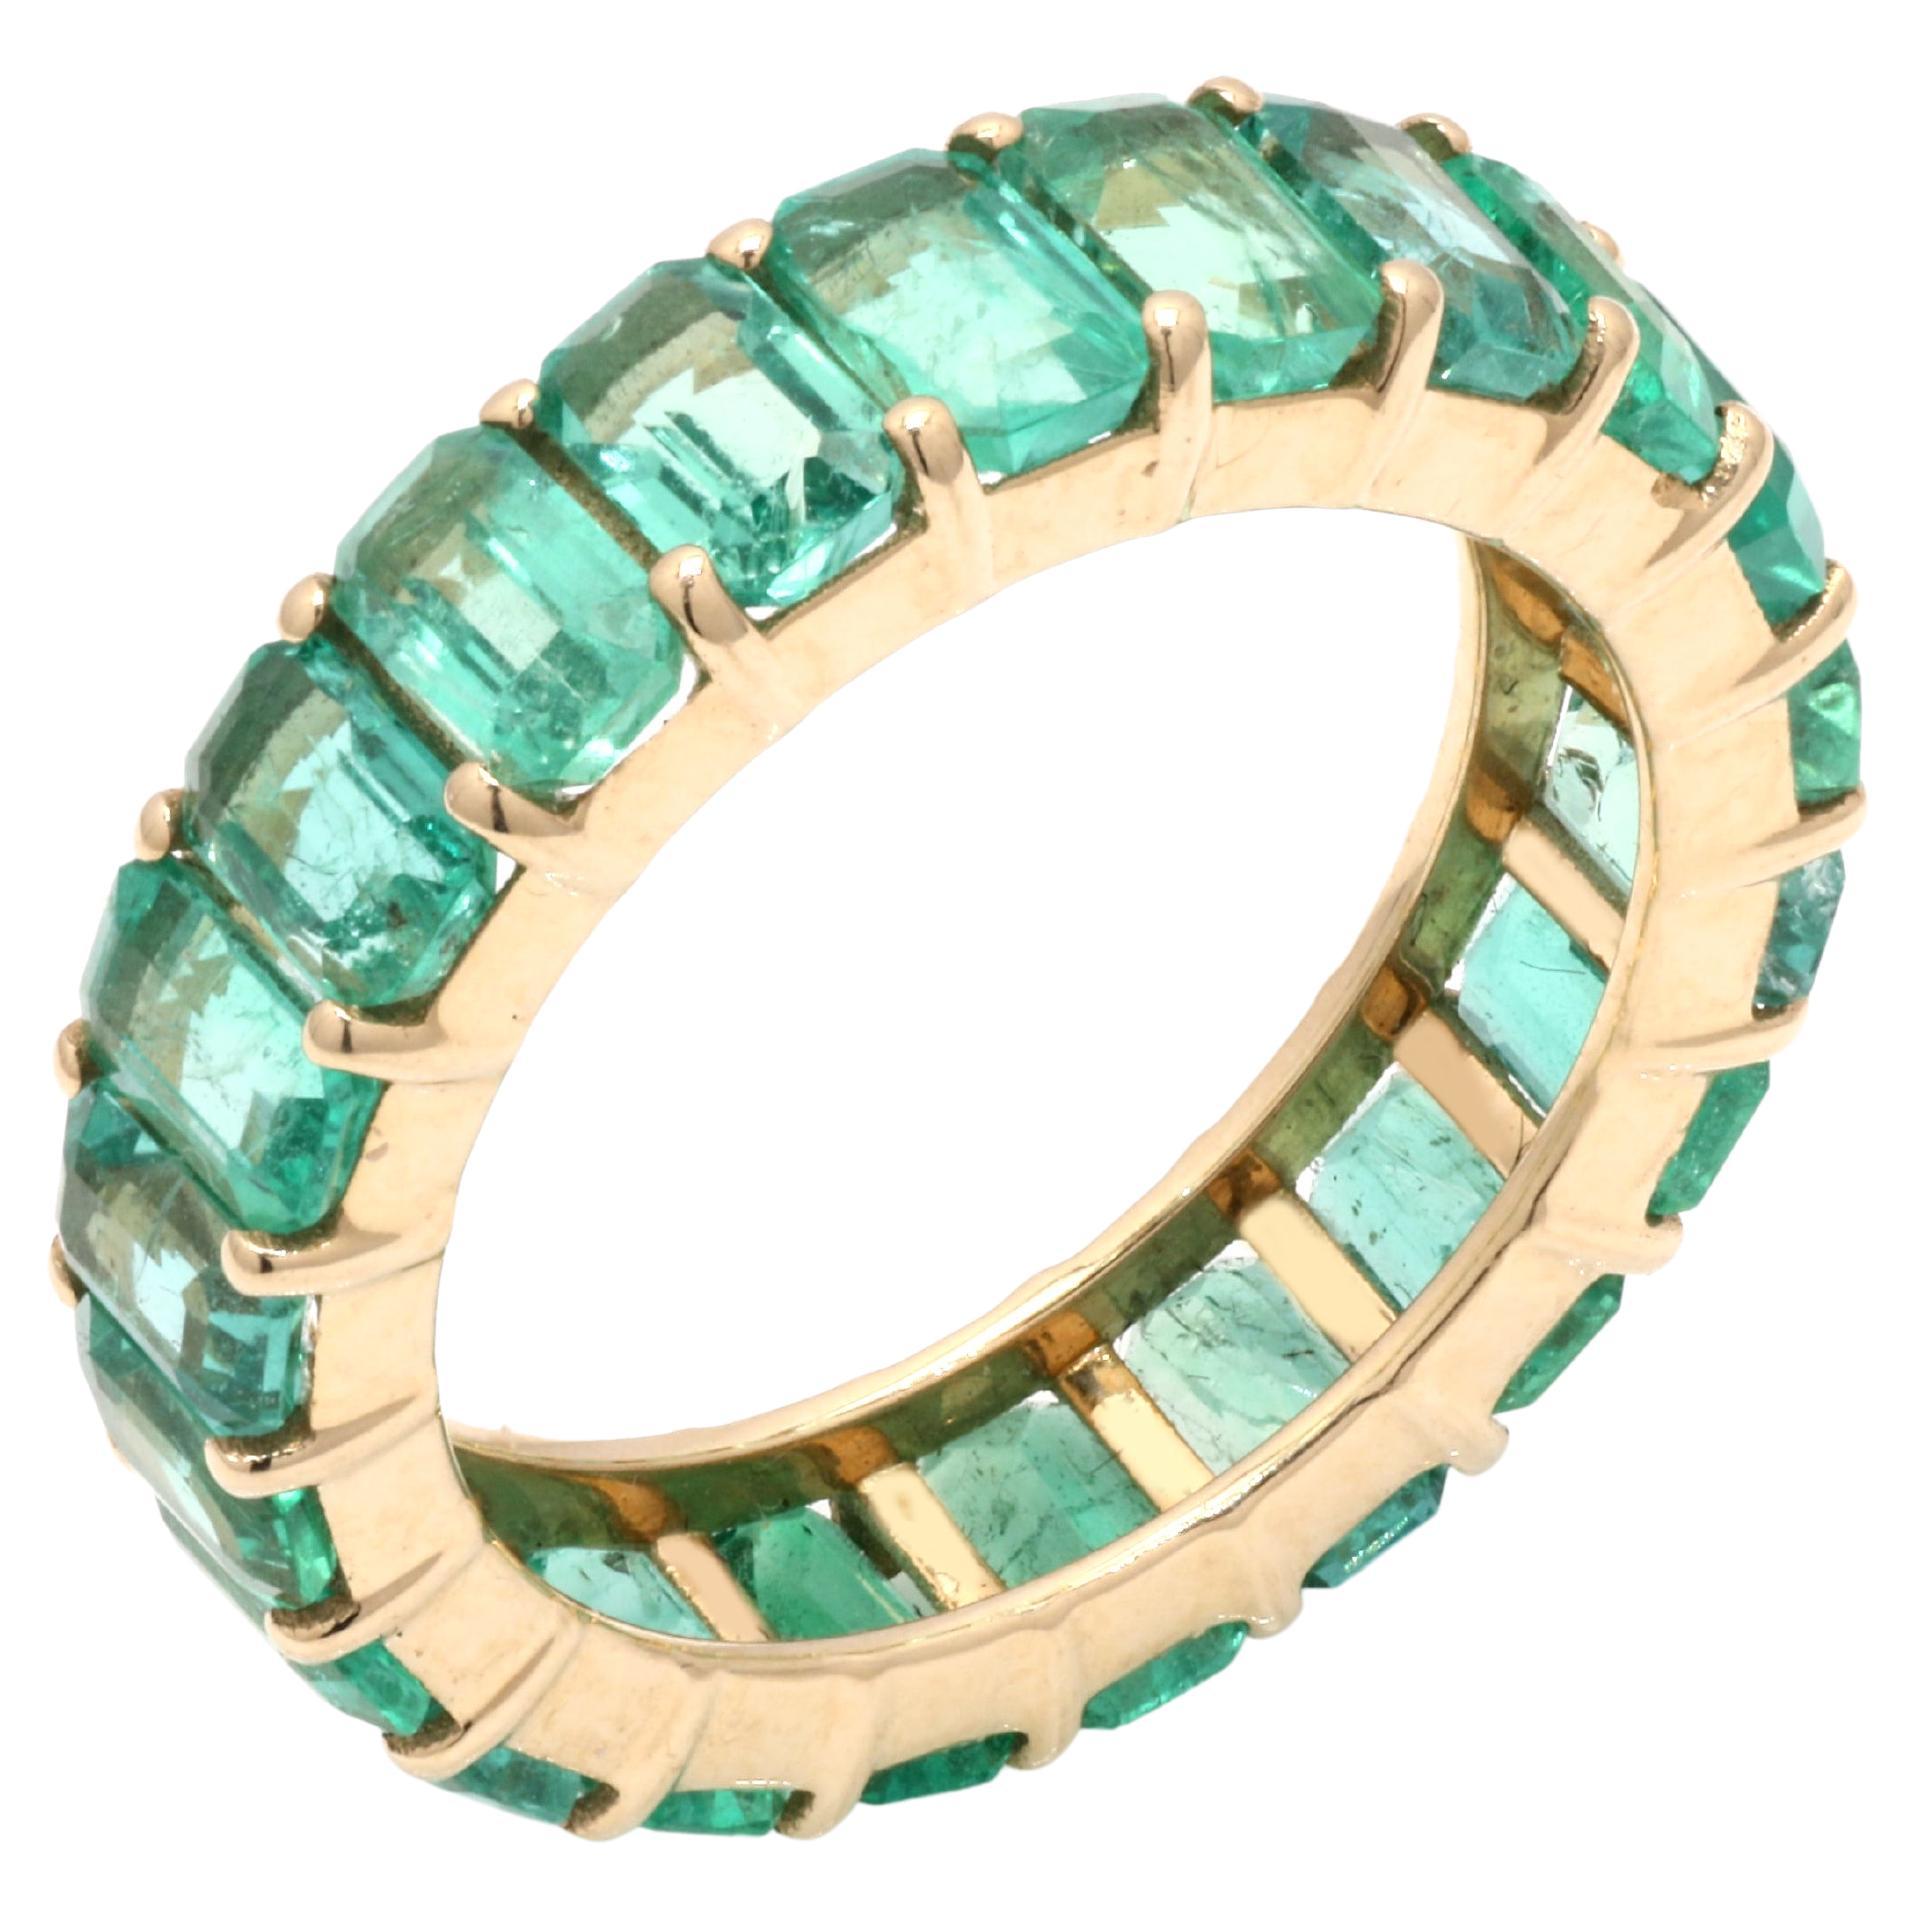 For Sale:  Stackable 5.46 Carat Emerald Cut Emerald Eternity Band Ring in 14K Yellow Gold